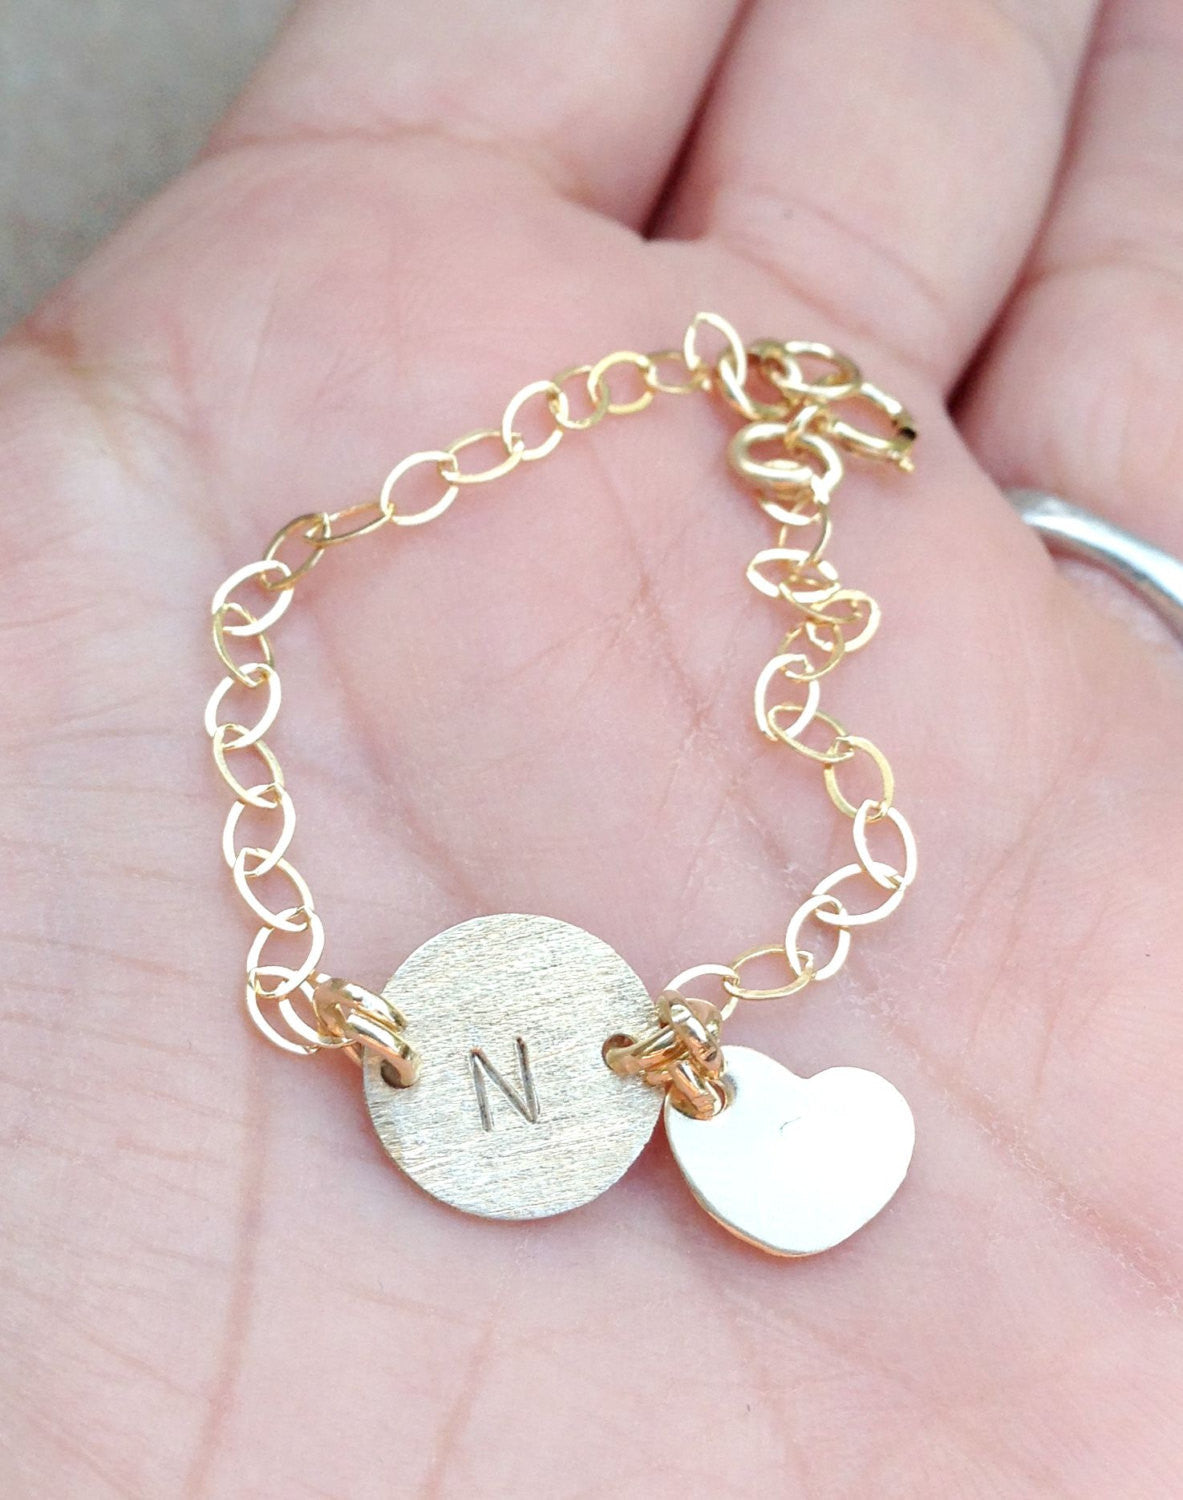 Yuehao Accessories Personalized Initial Bracelet